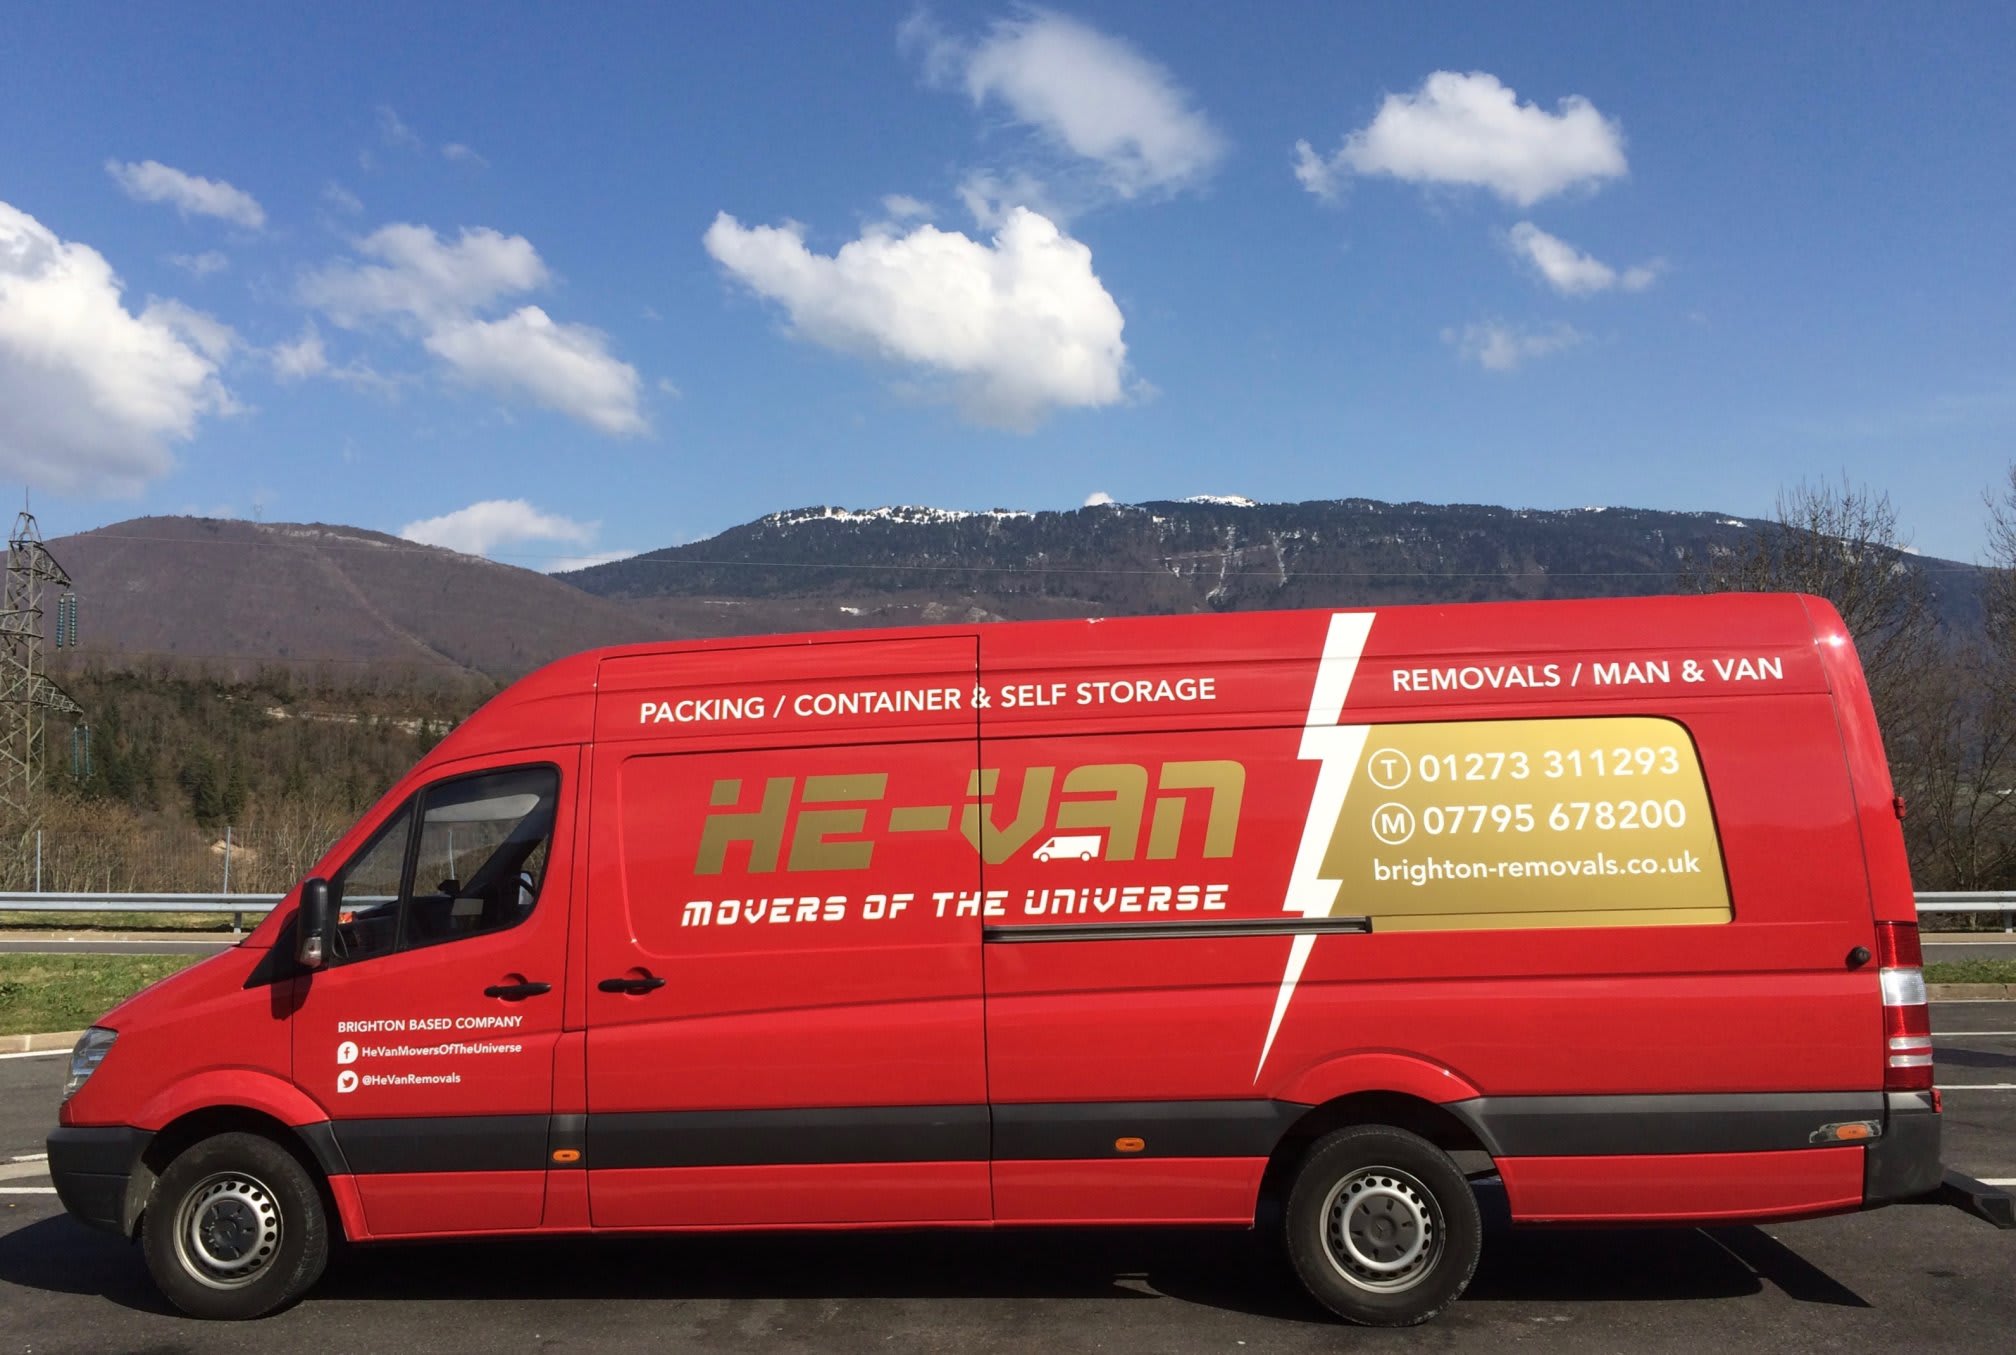 Images He-Van Movers of the Universe Ltd